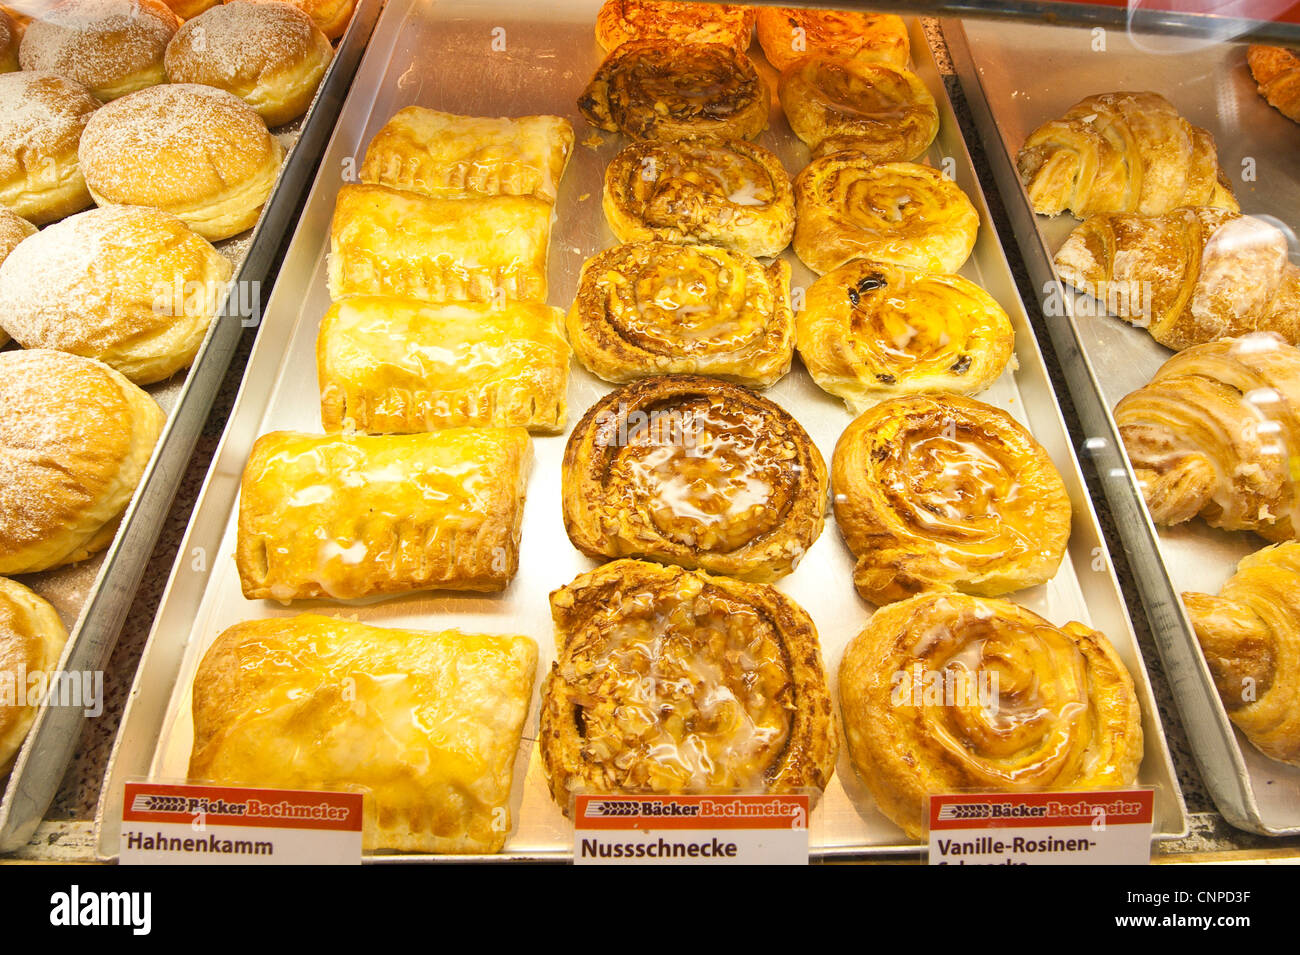 Pastries in the local market Zwiesel, Germany. Stock Photo